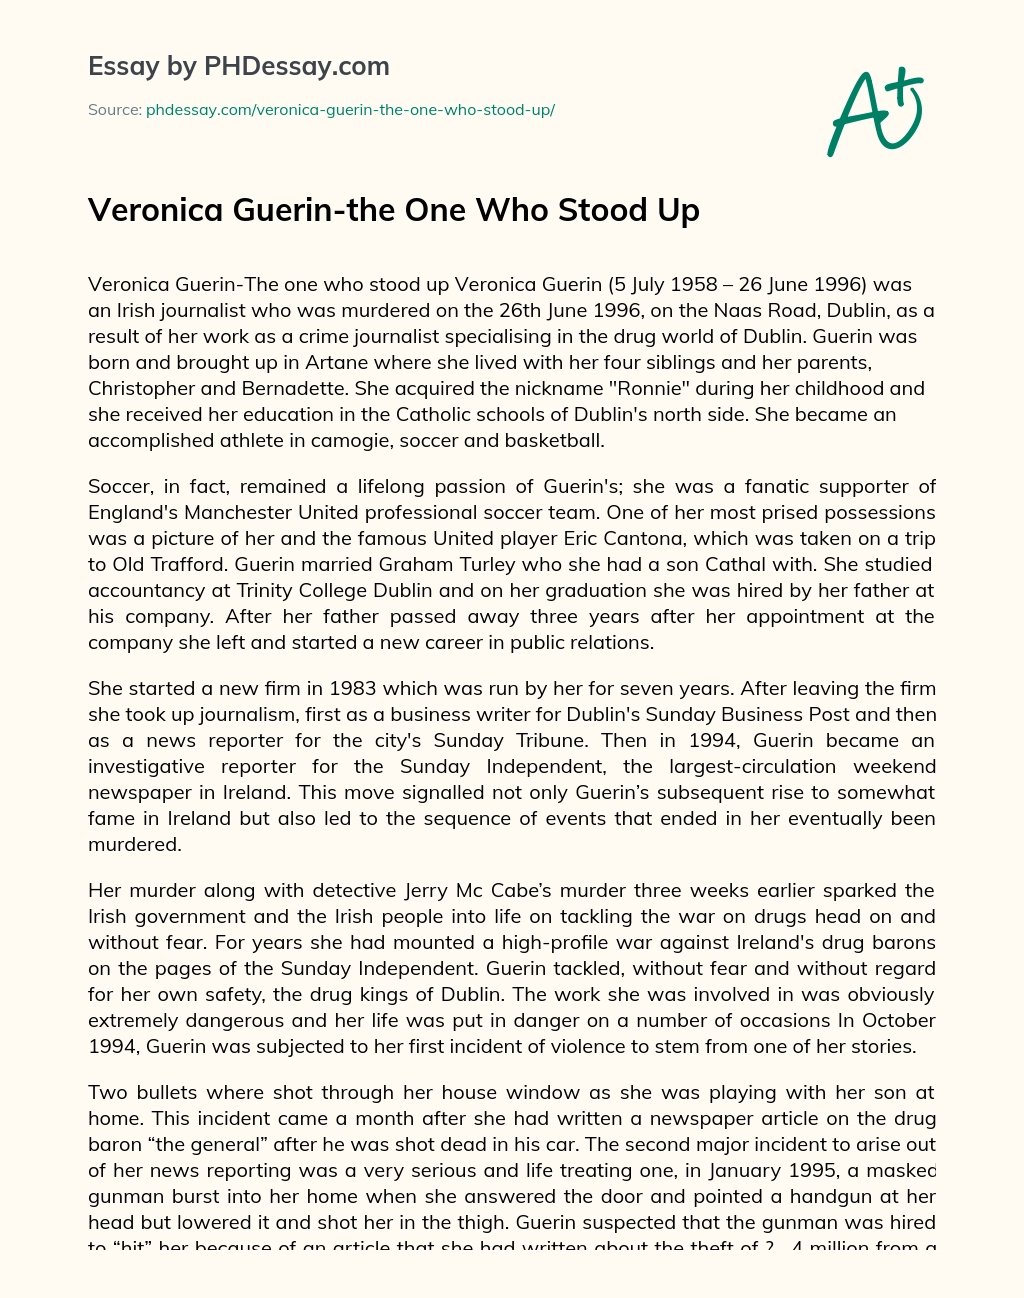 Veronica Guerin-the One Who Stood Up essay